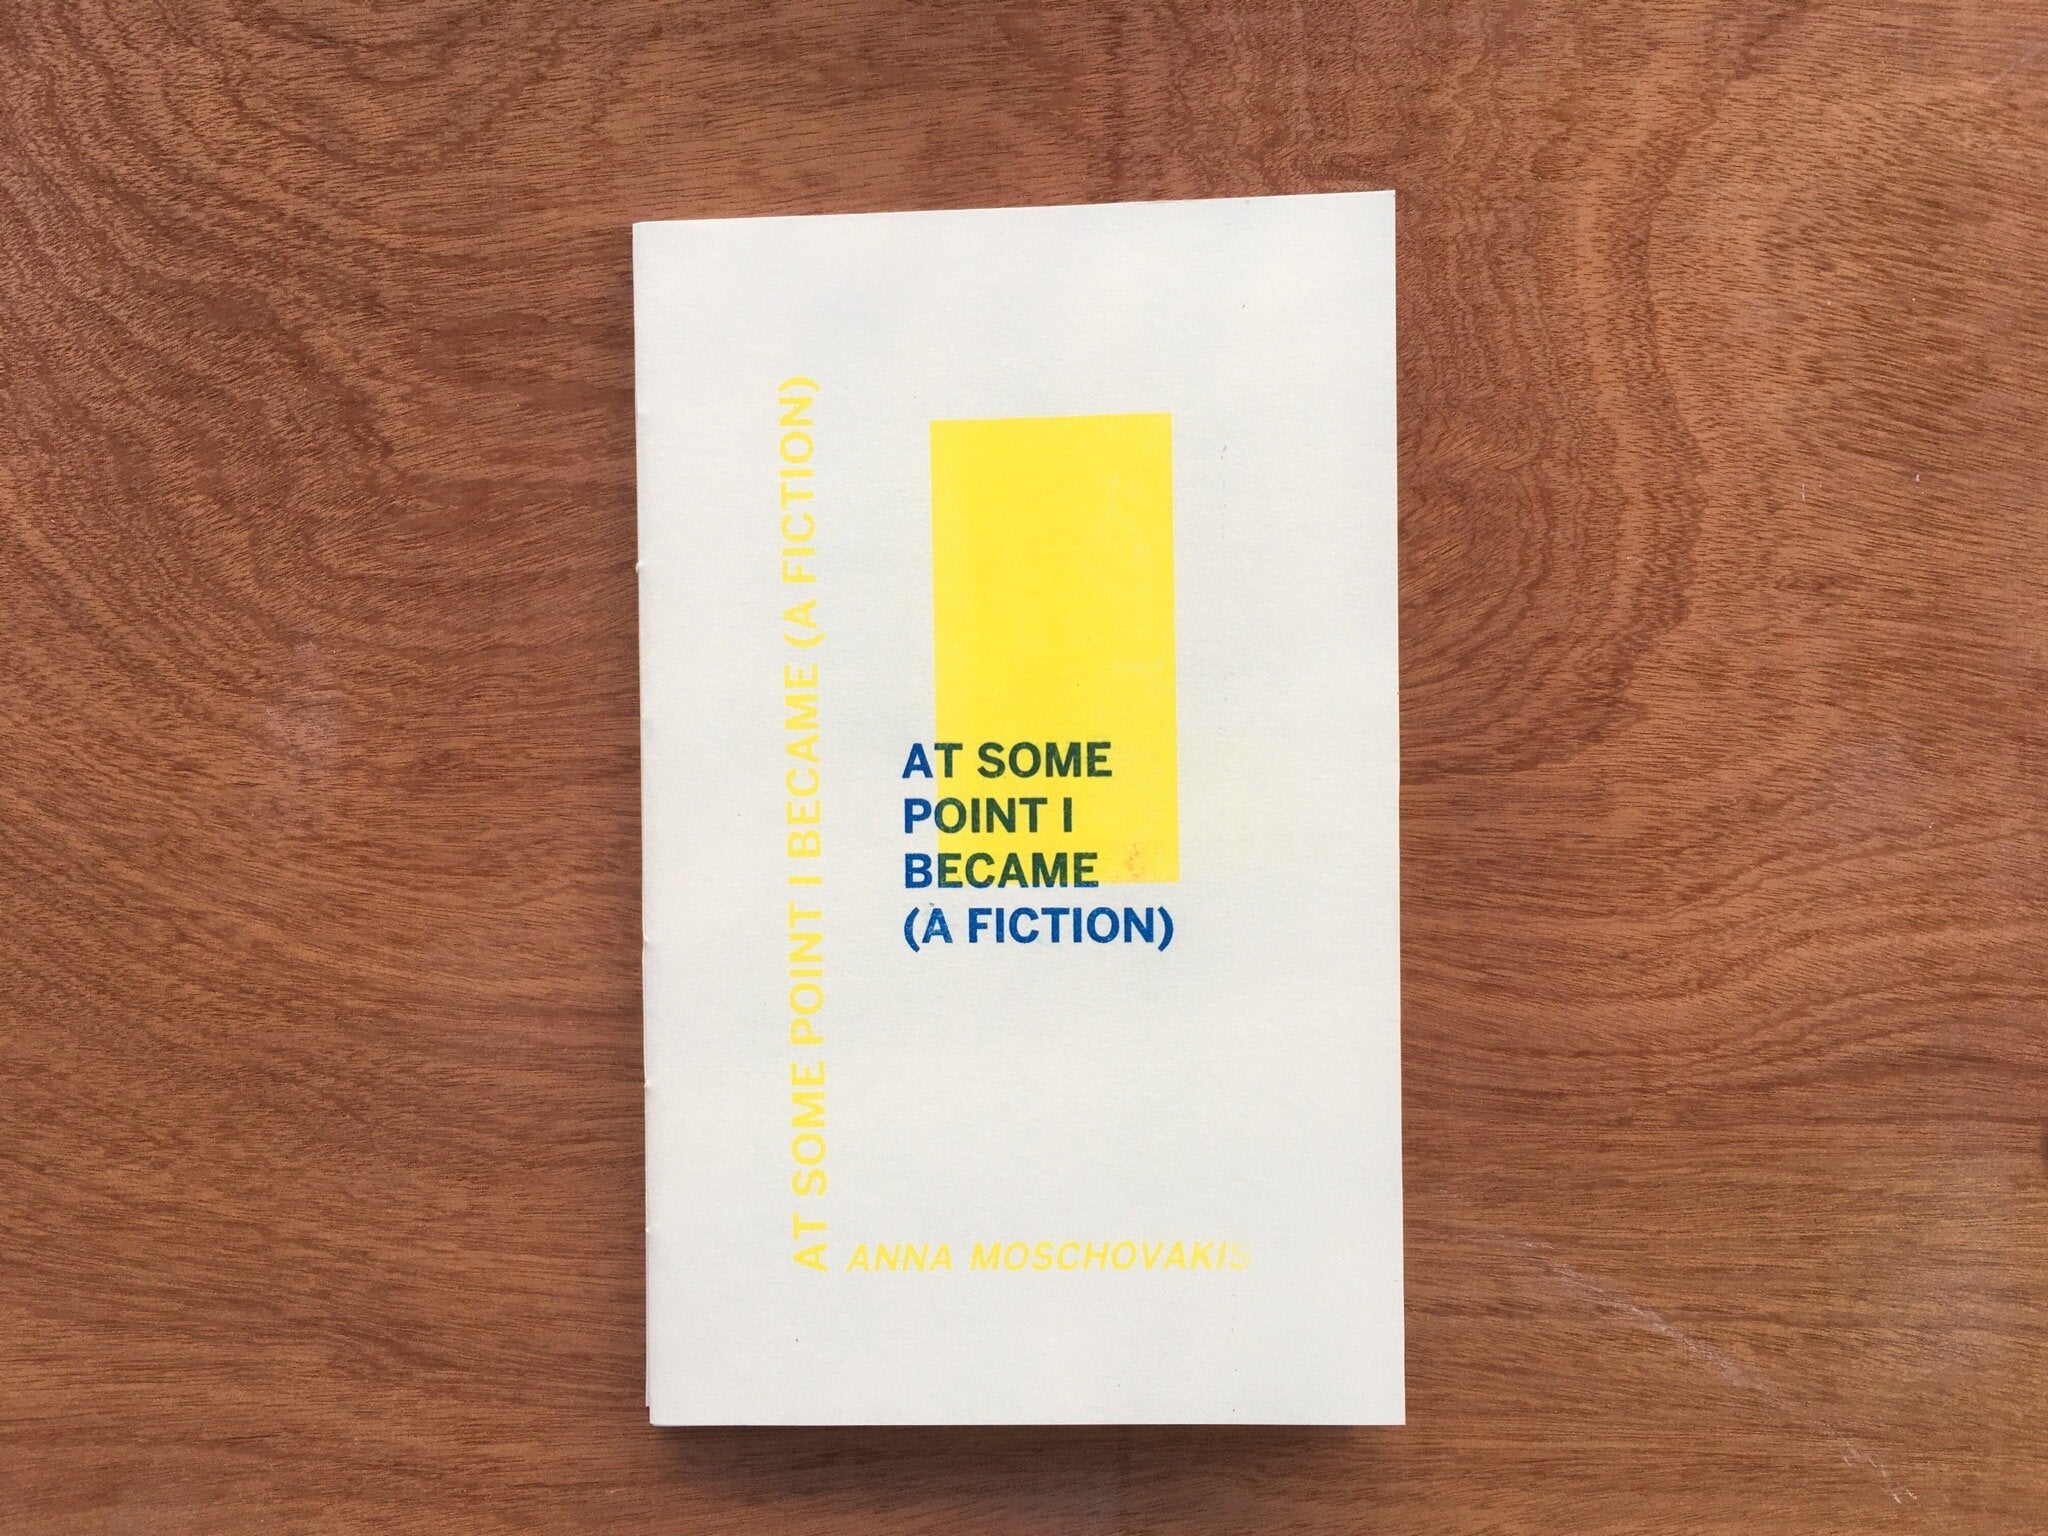 AT SOME POINT I BECAME (A FICTION)/THIS ONE IS CAPABLE OF UNDERSTANDING by Anna Moschovakis